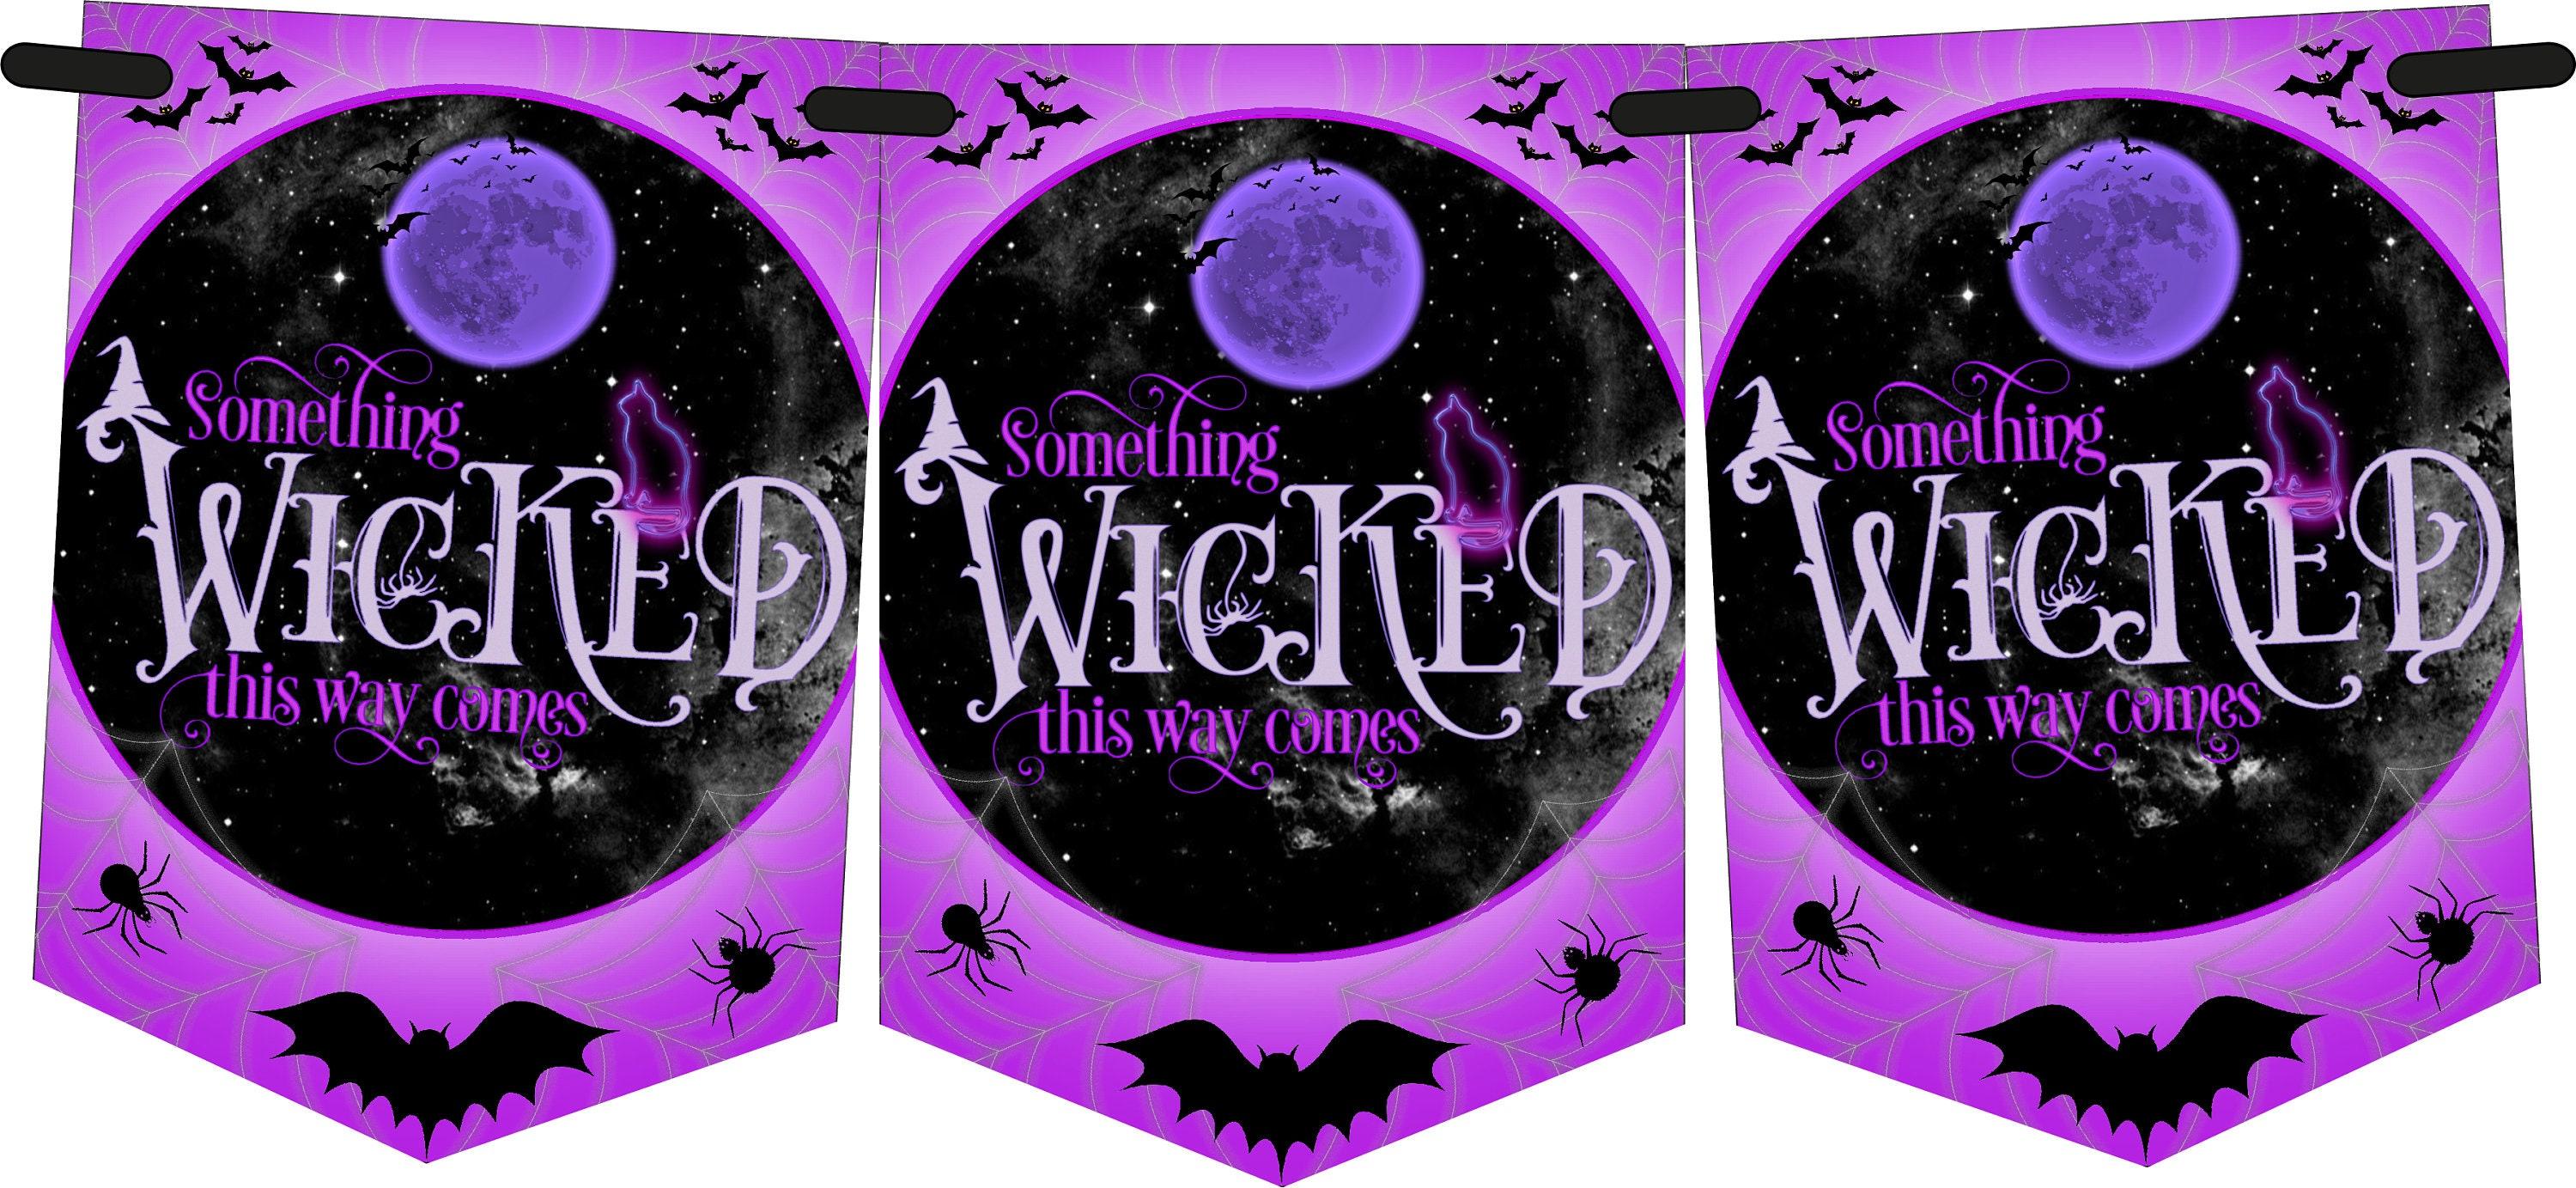 Halloween Bunting,Halloween Banner,8 Flags,Garland for Halloween Decoration,Something Wicked